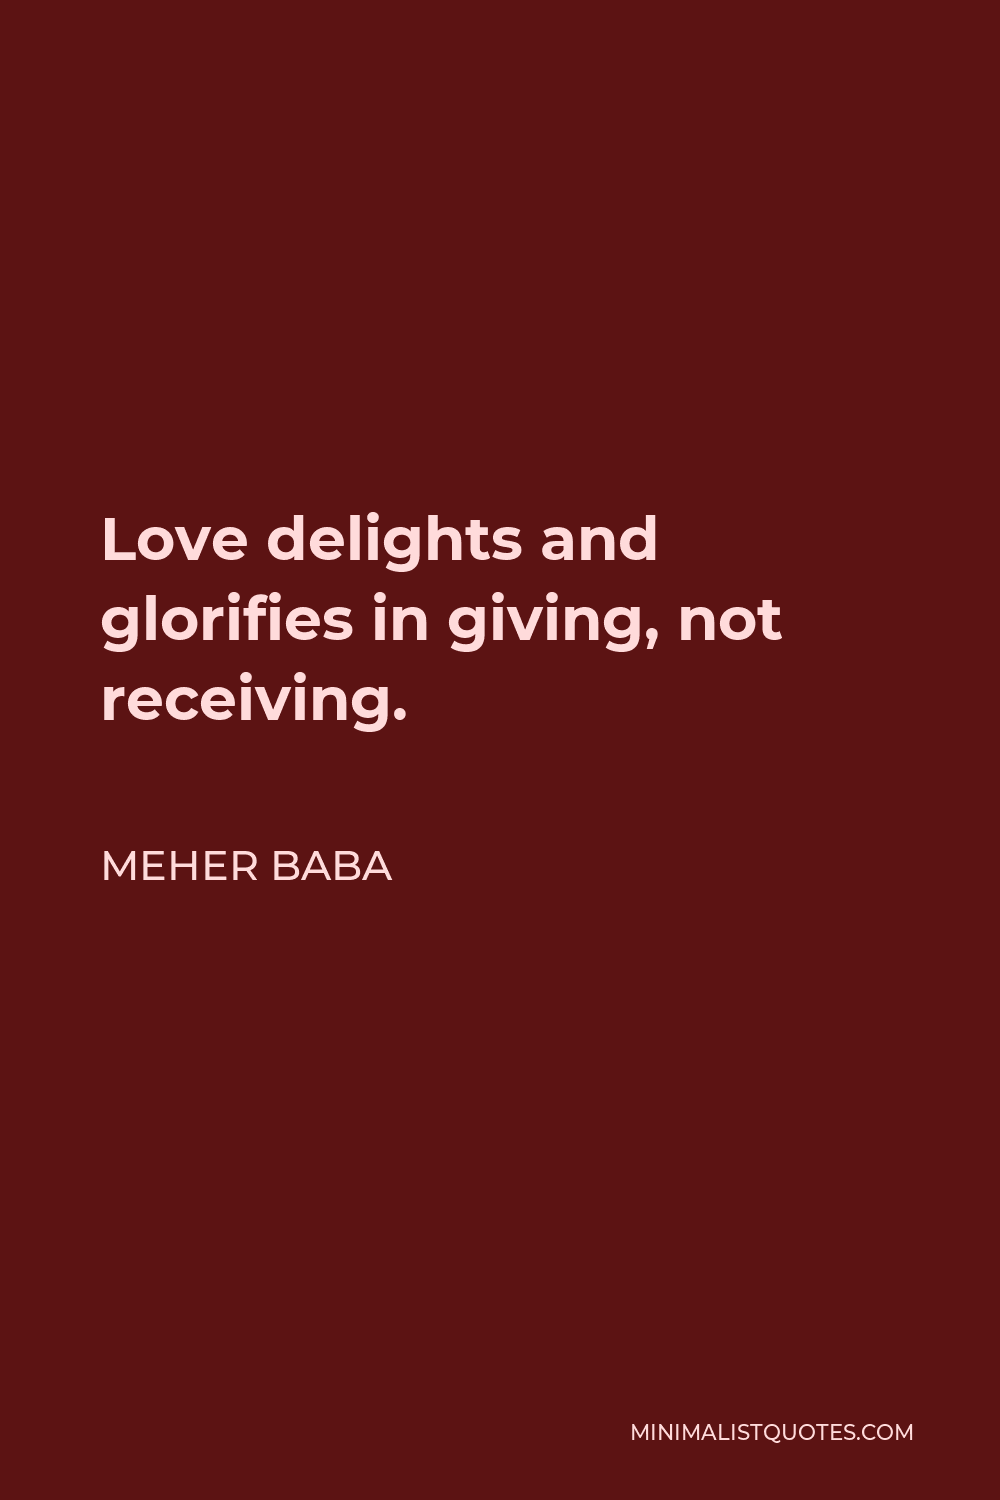 Meher Baba Quote - Love delights and glorifies in giving, not receiving.